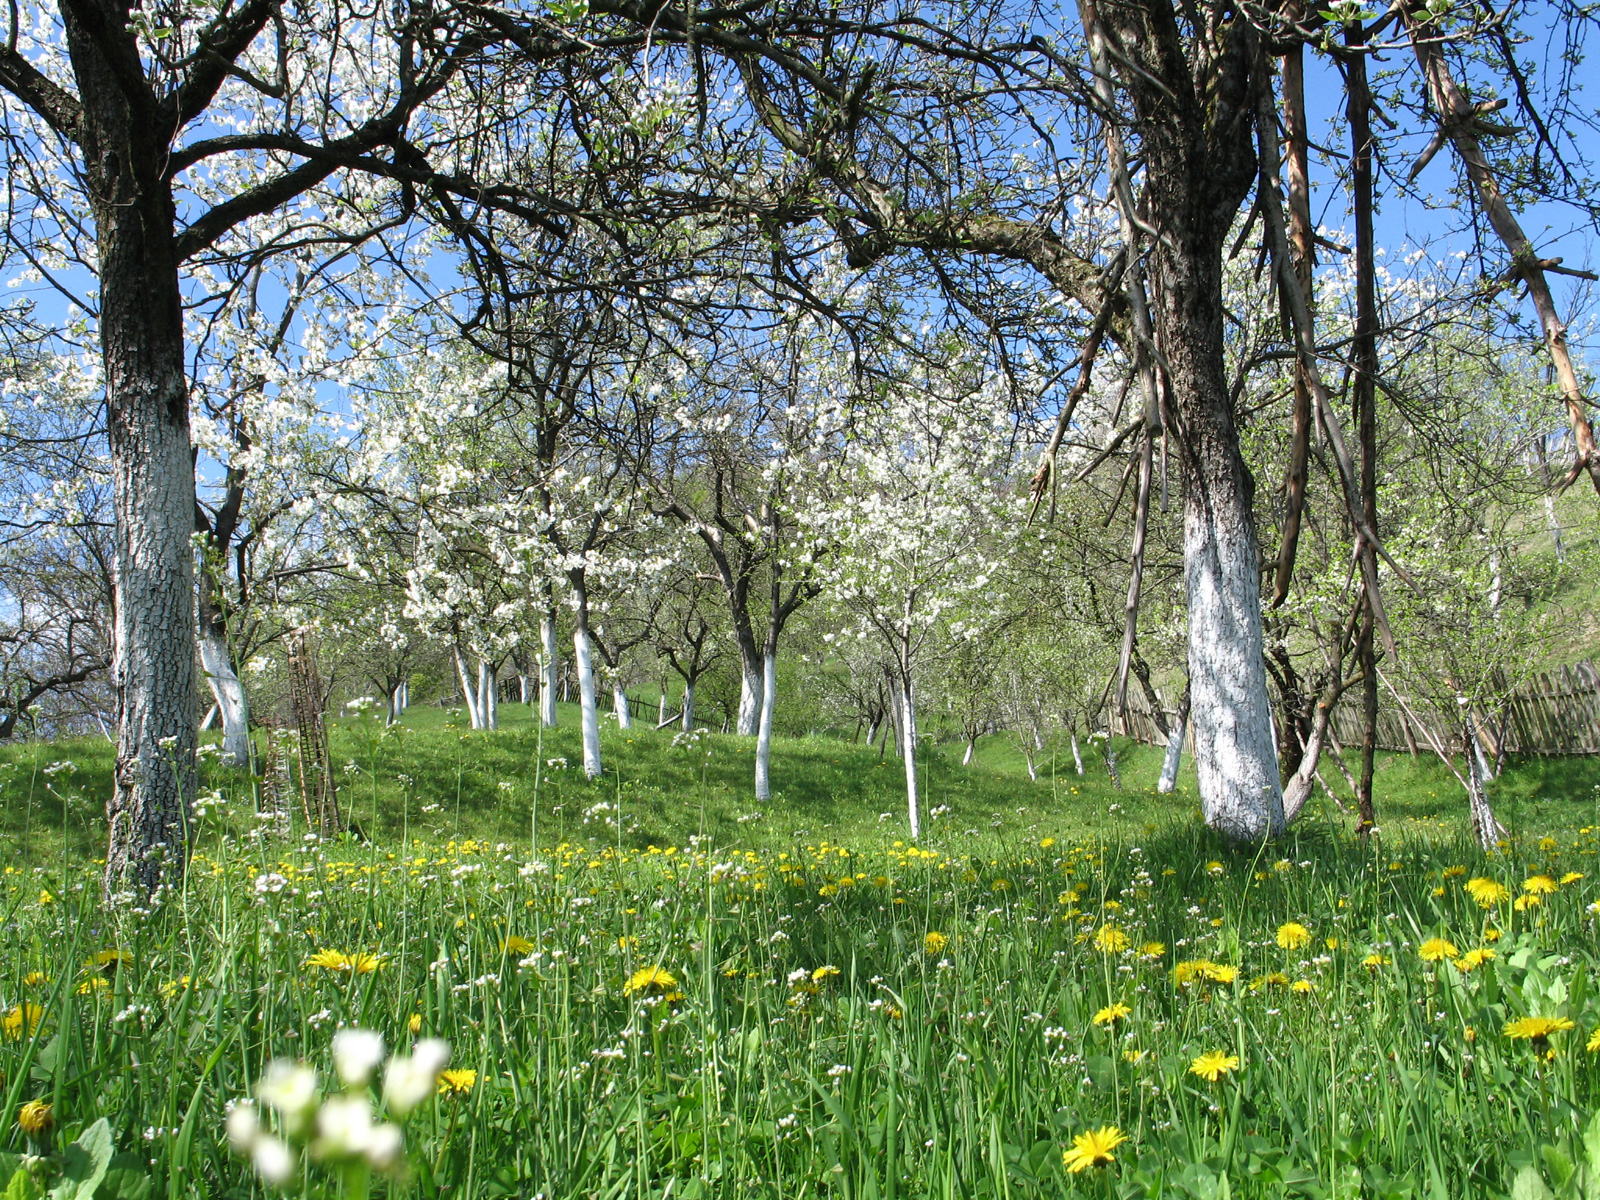 Orchard in spring